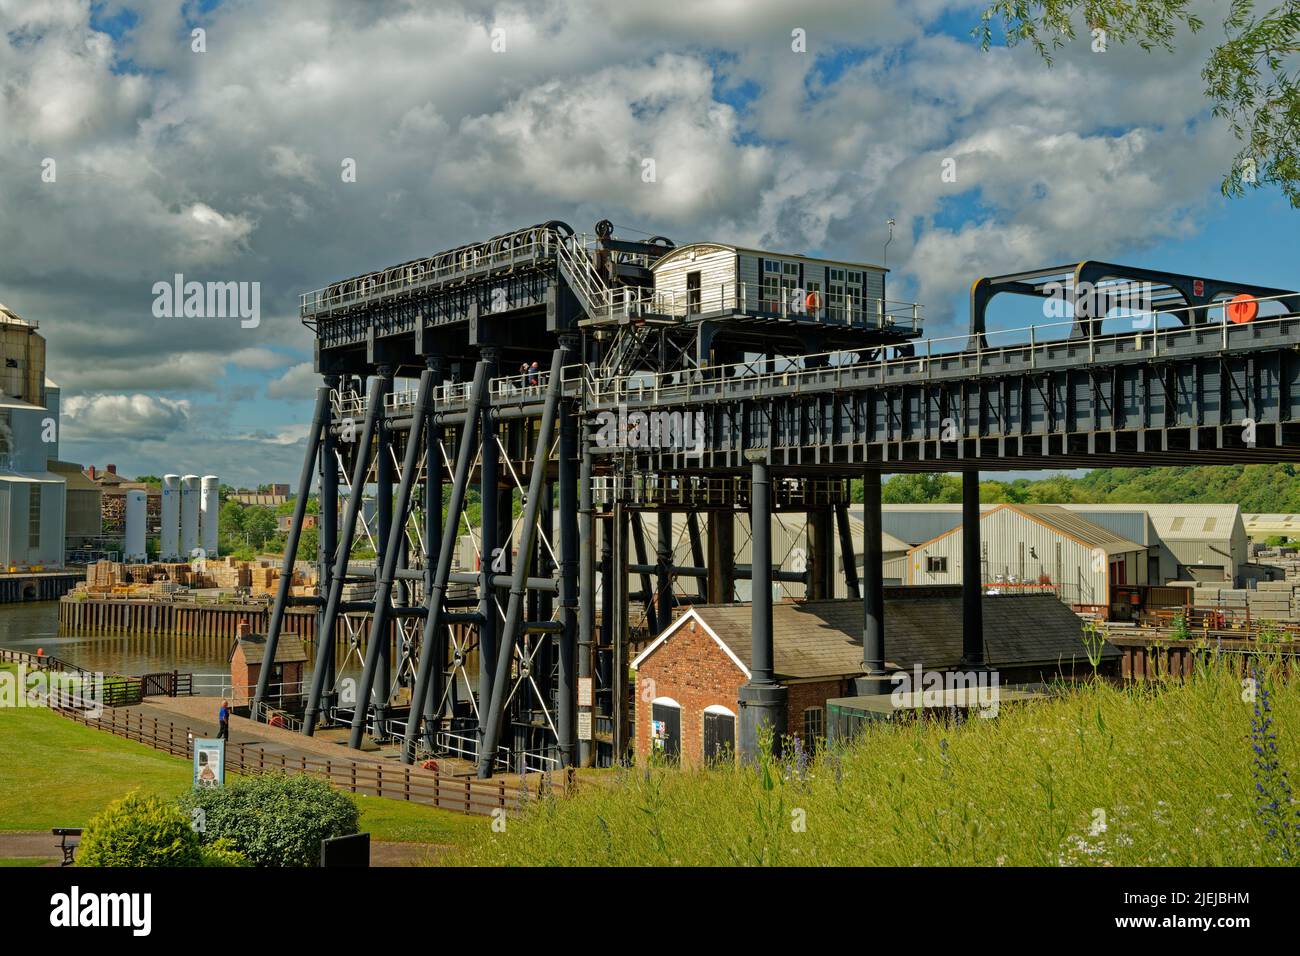 The Anderton Boat lift at Anderton near Northwich in Cheshire, England transfers boats & barges between the River Weaver and the Trent & Mersey canal. Stock Photo